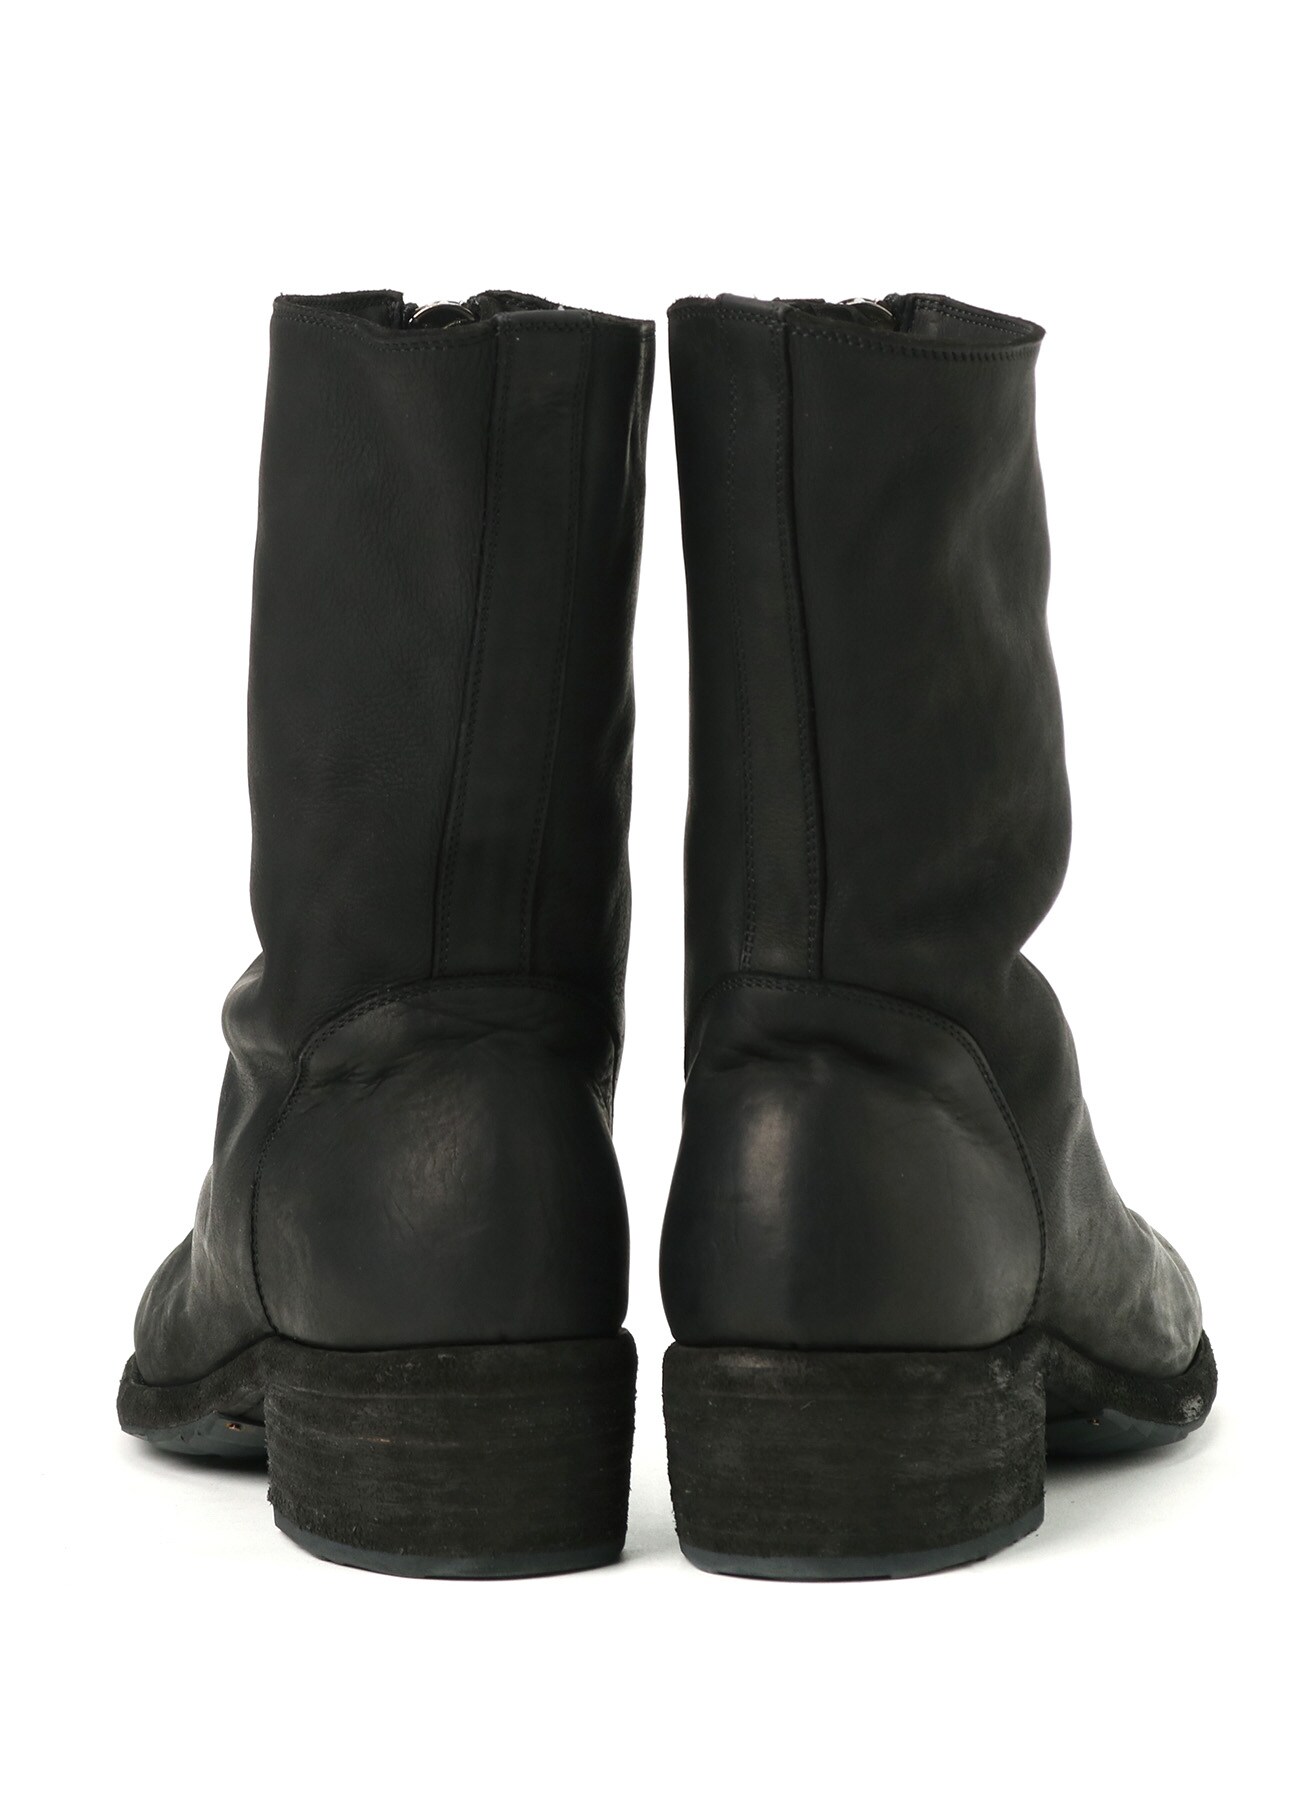 SOFT CALF LEATHER FRONT ZIPPER BOOTS